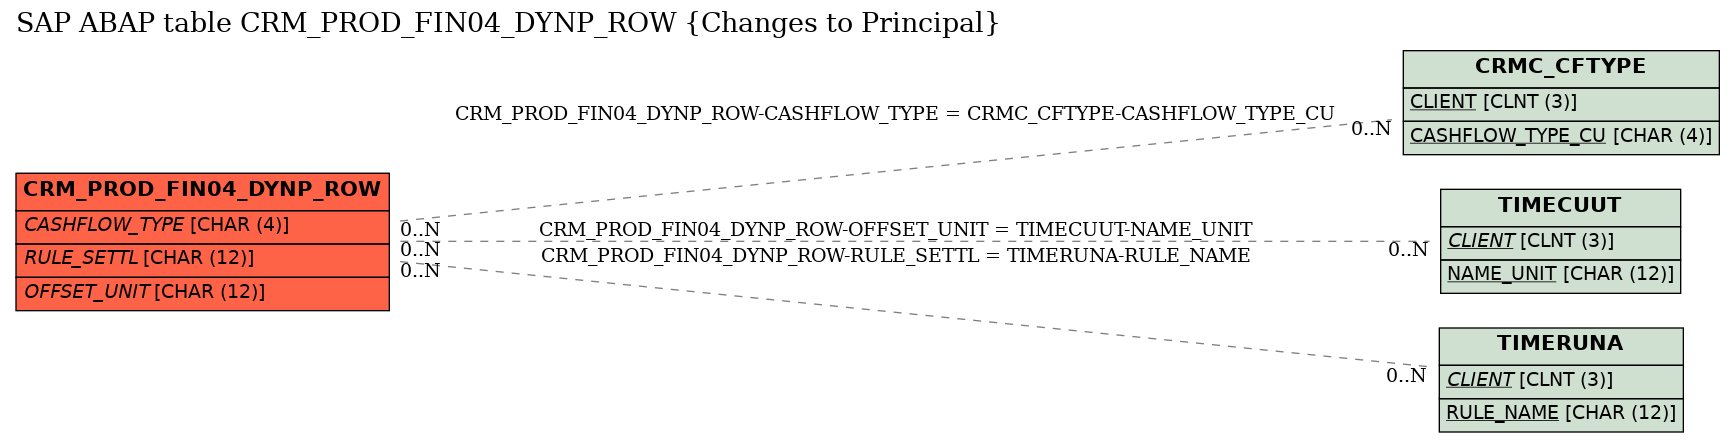 E-R Diagram for table CRM_PROD_FIN04_DYNP_ROW (Changes to Principal)